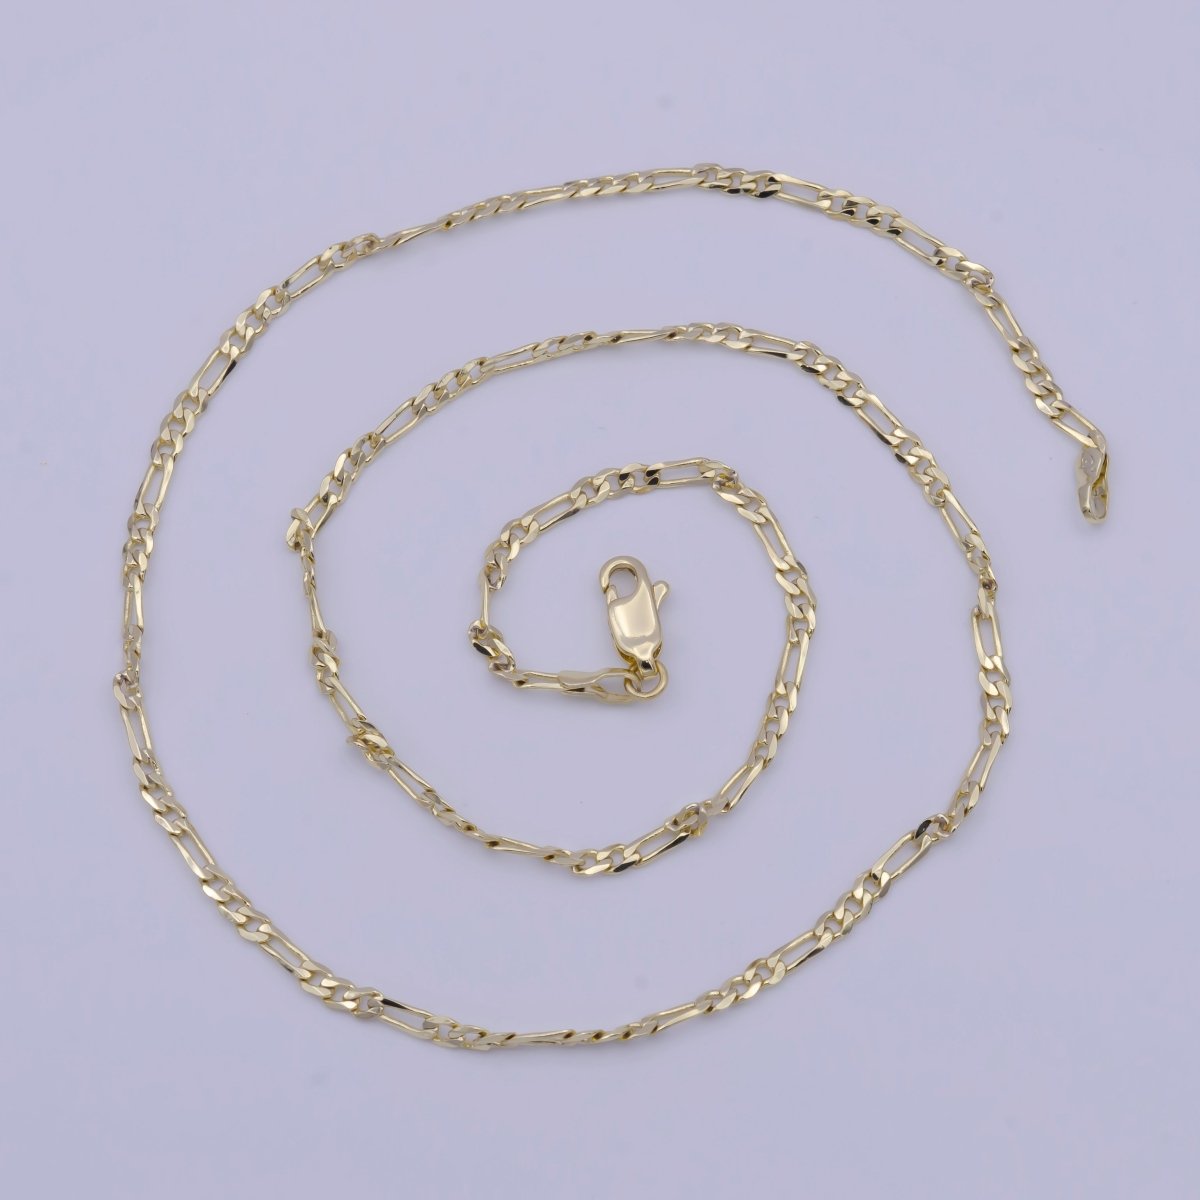 14K Gold Filled Dainty Figaro Chain 17.5 inch Minimalist Necklace 2.5mm Width Ready to Wear | WA-1155 Clearance Pricing - DLUXCA